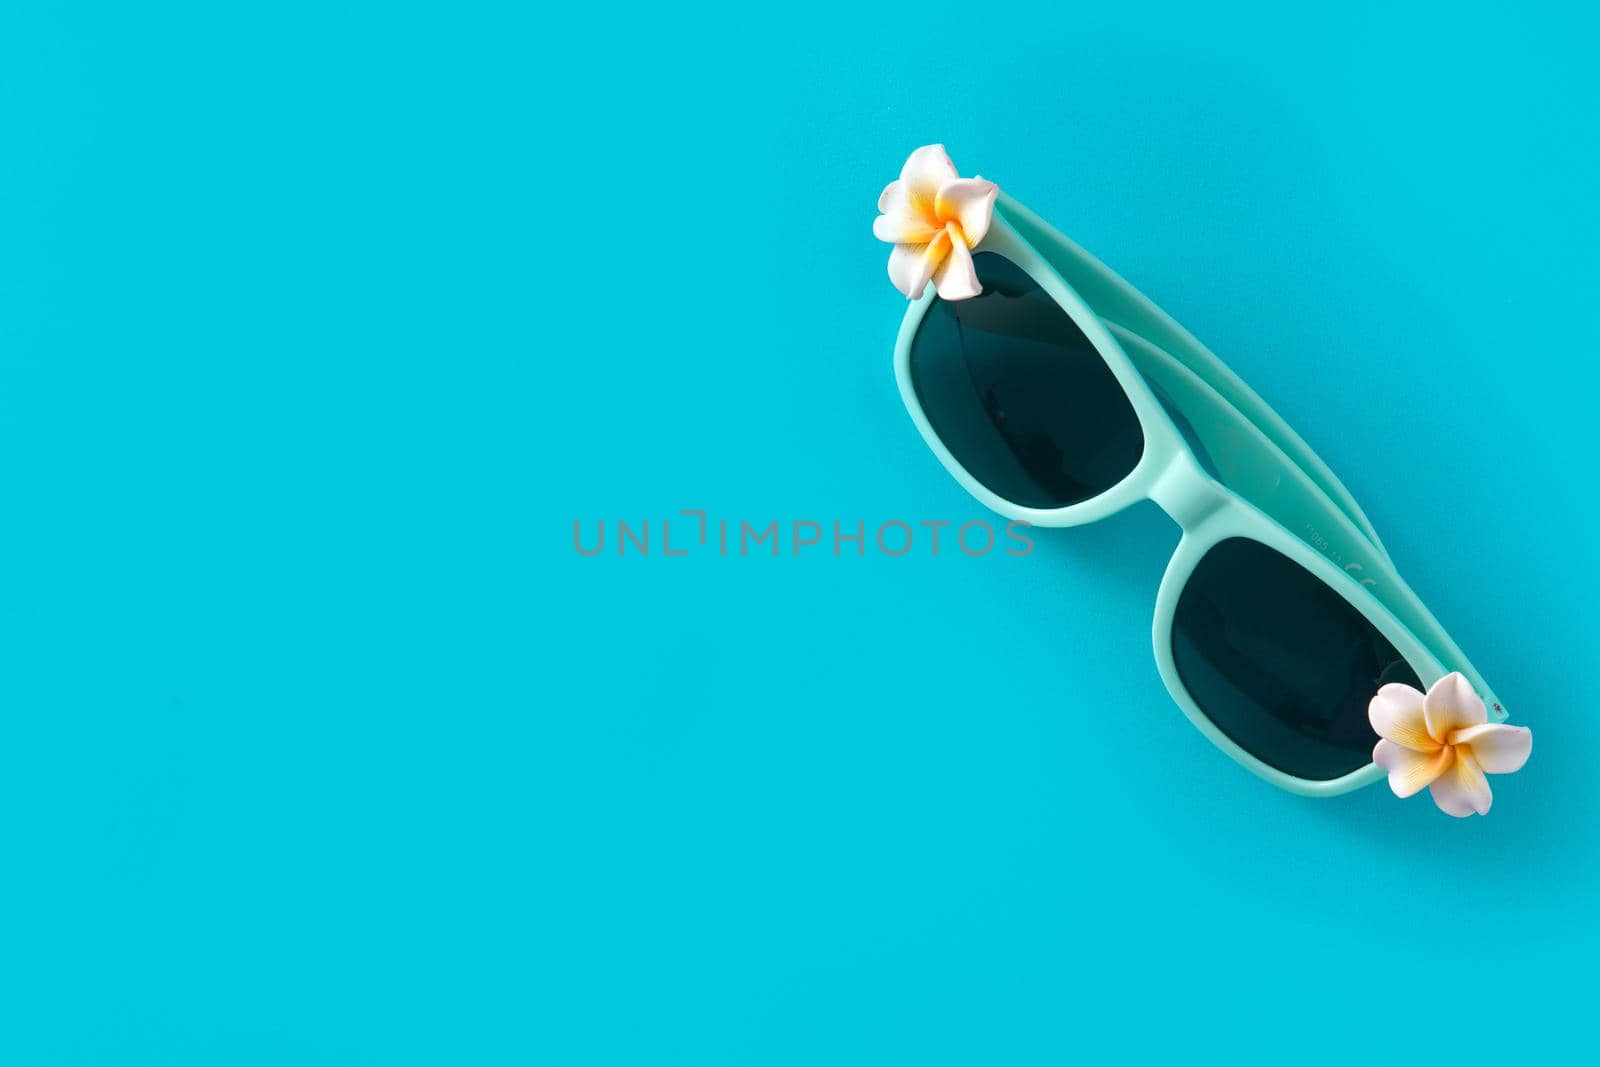 Sunglasses with flowers by chandlervid85